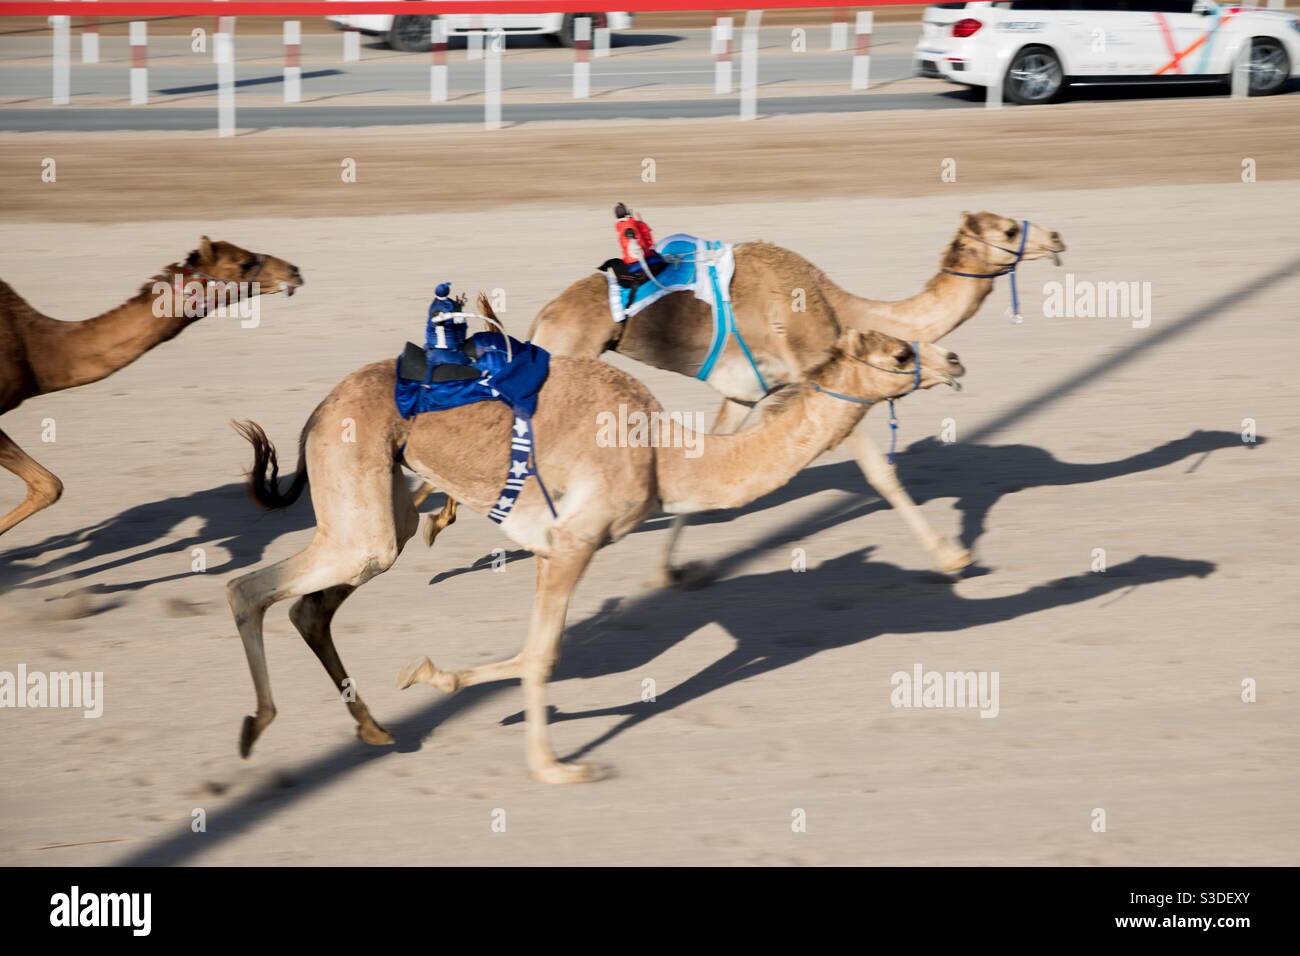 Al Bashair Camel Race: February 2021 Adam, Oman. The race brings about the best of regional camels from Saudi Arabia, Qatar,UAE, and Oman. various age groups of camels compete in this 6day event. Stock Photo